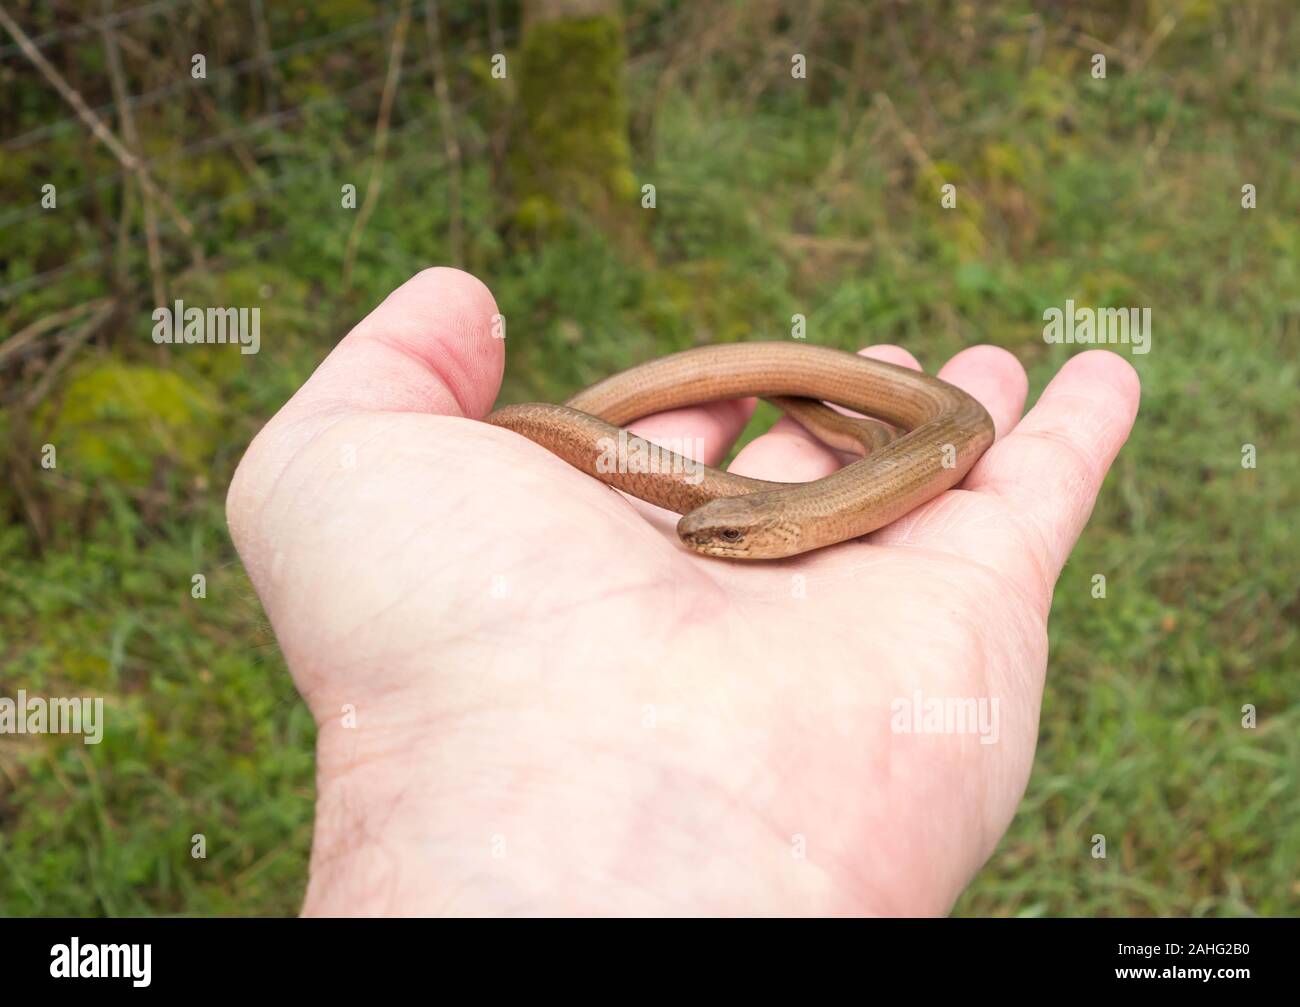 Female Slow worm (Anguis fragilis) in hand, on a nature reserve in the Herefordshire UK countryside. February 2019 Stock Photo